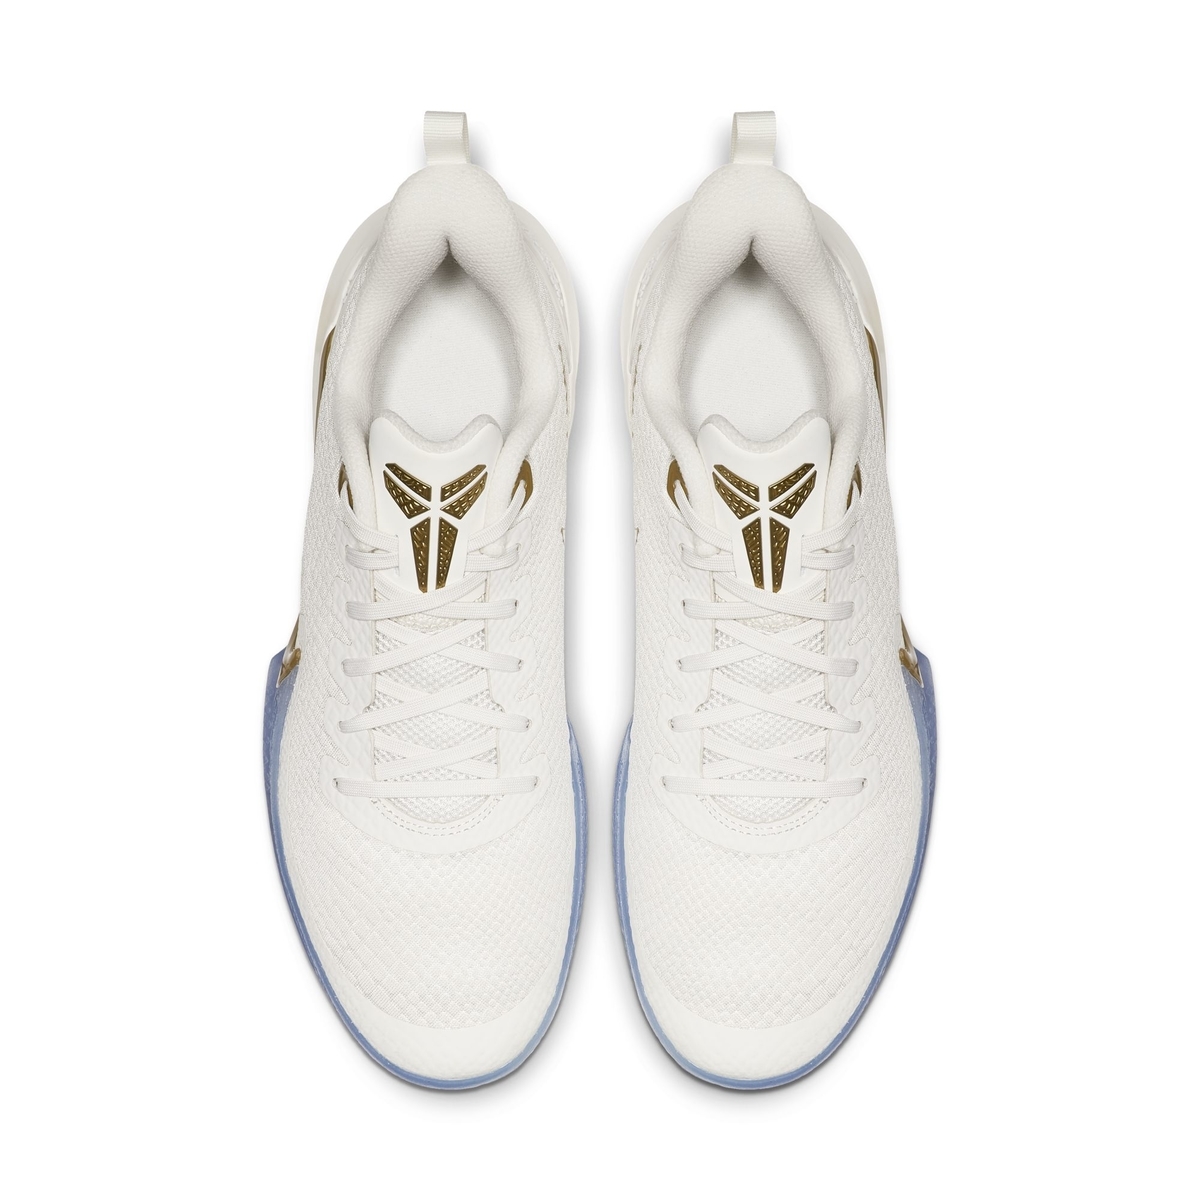 The Nike Mamba Focus to Release in White/Gold - WearTesters